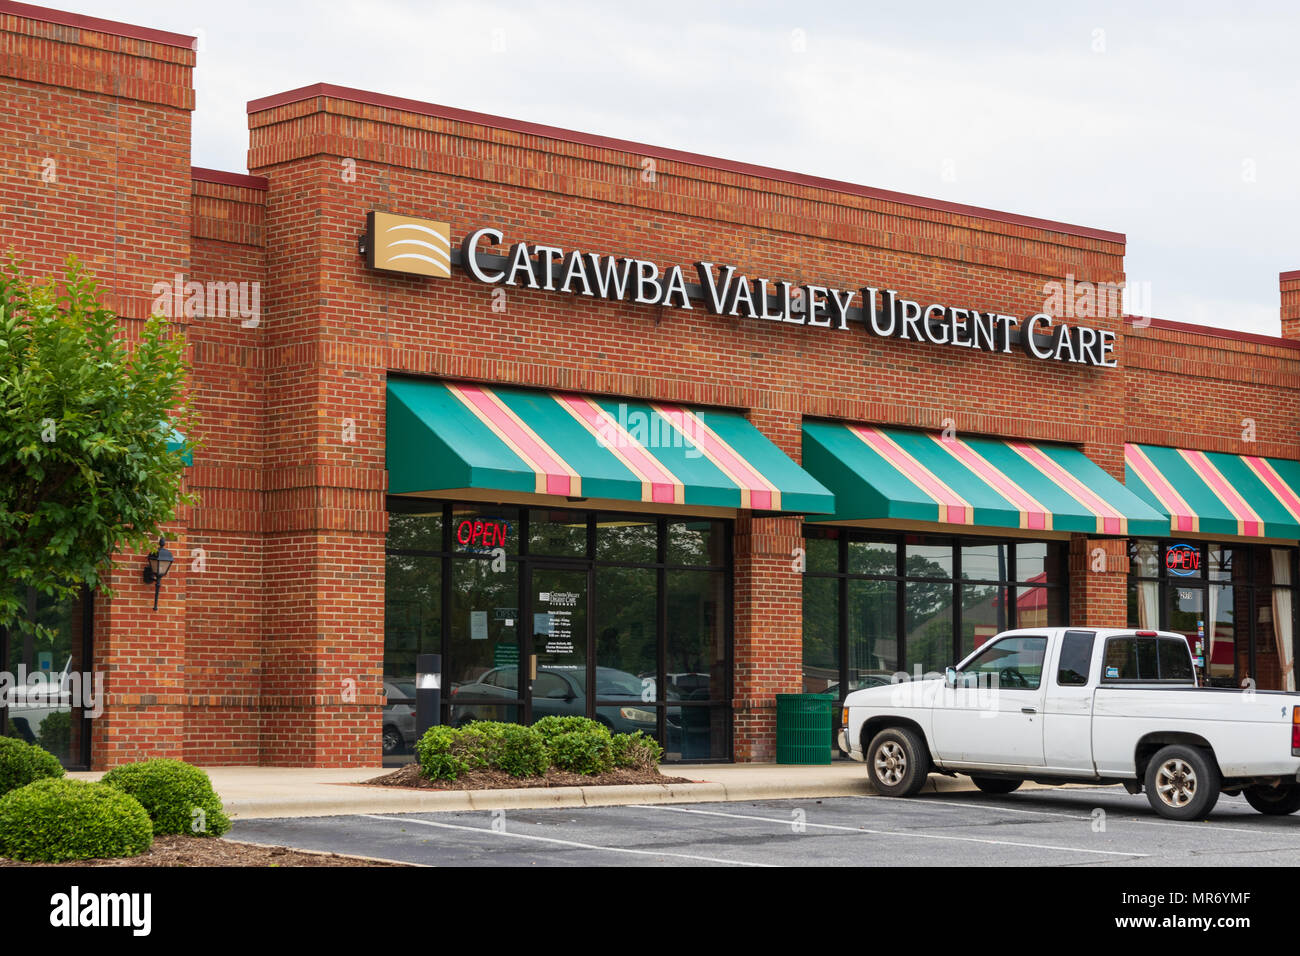 HICKORY, NC, USA-21 MAY 18: Private emergency health services are becoming more common in the US, such as this Catawba Valley Urgent Care facility. Stock Photo